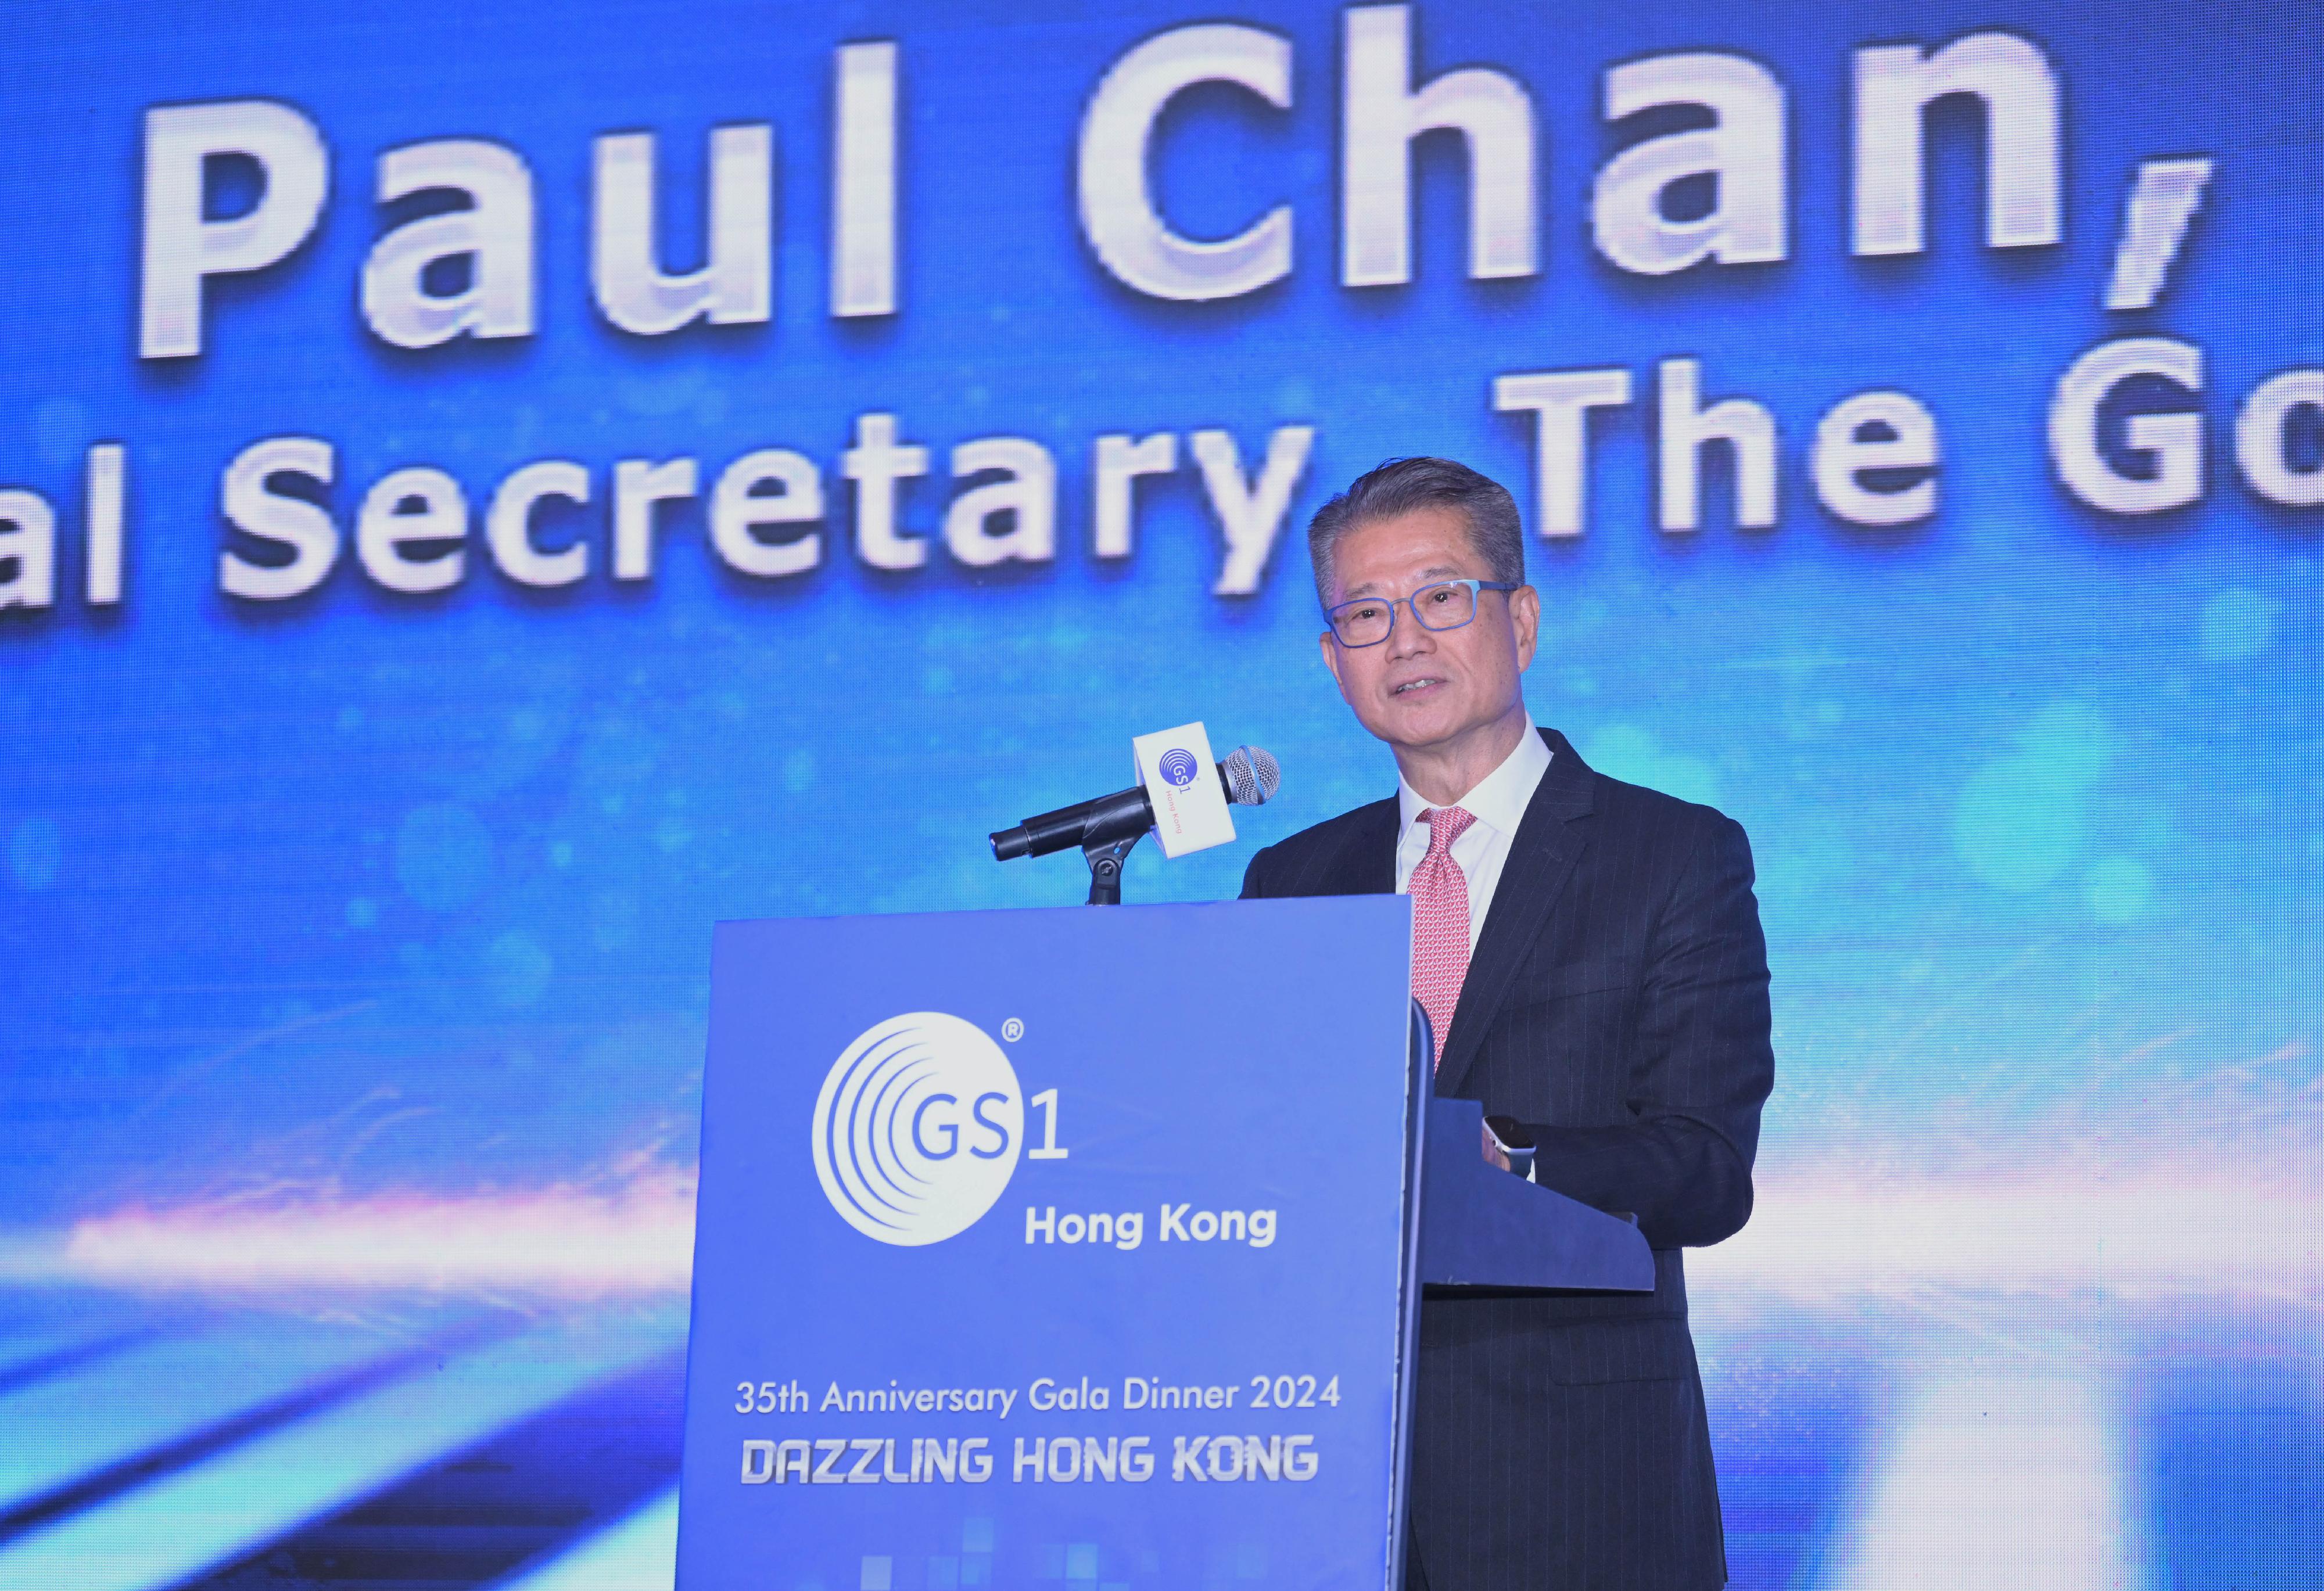 The Financial Secretary, Mr Paul Chan, speaks at the GS1 Hong Kong 35th Anniversary Gala Dinner tonight (March 15).